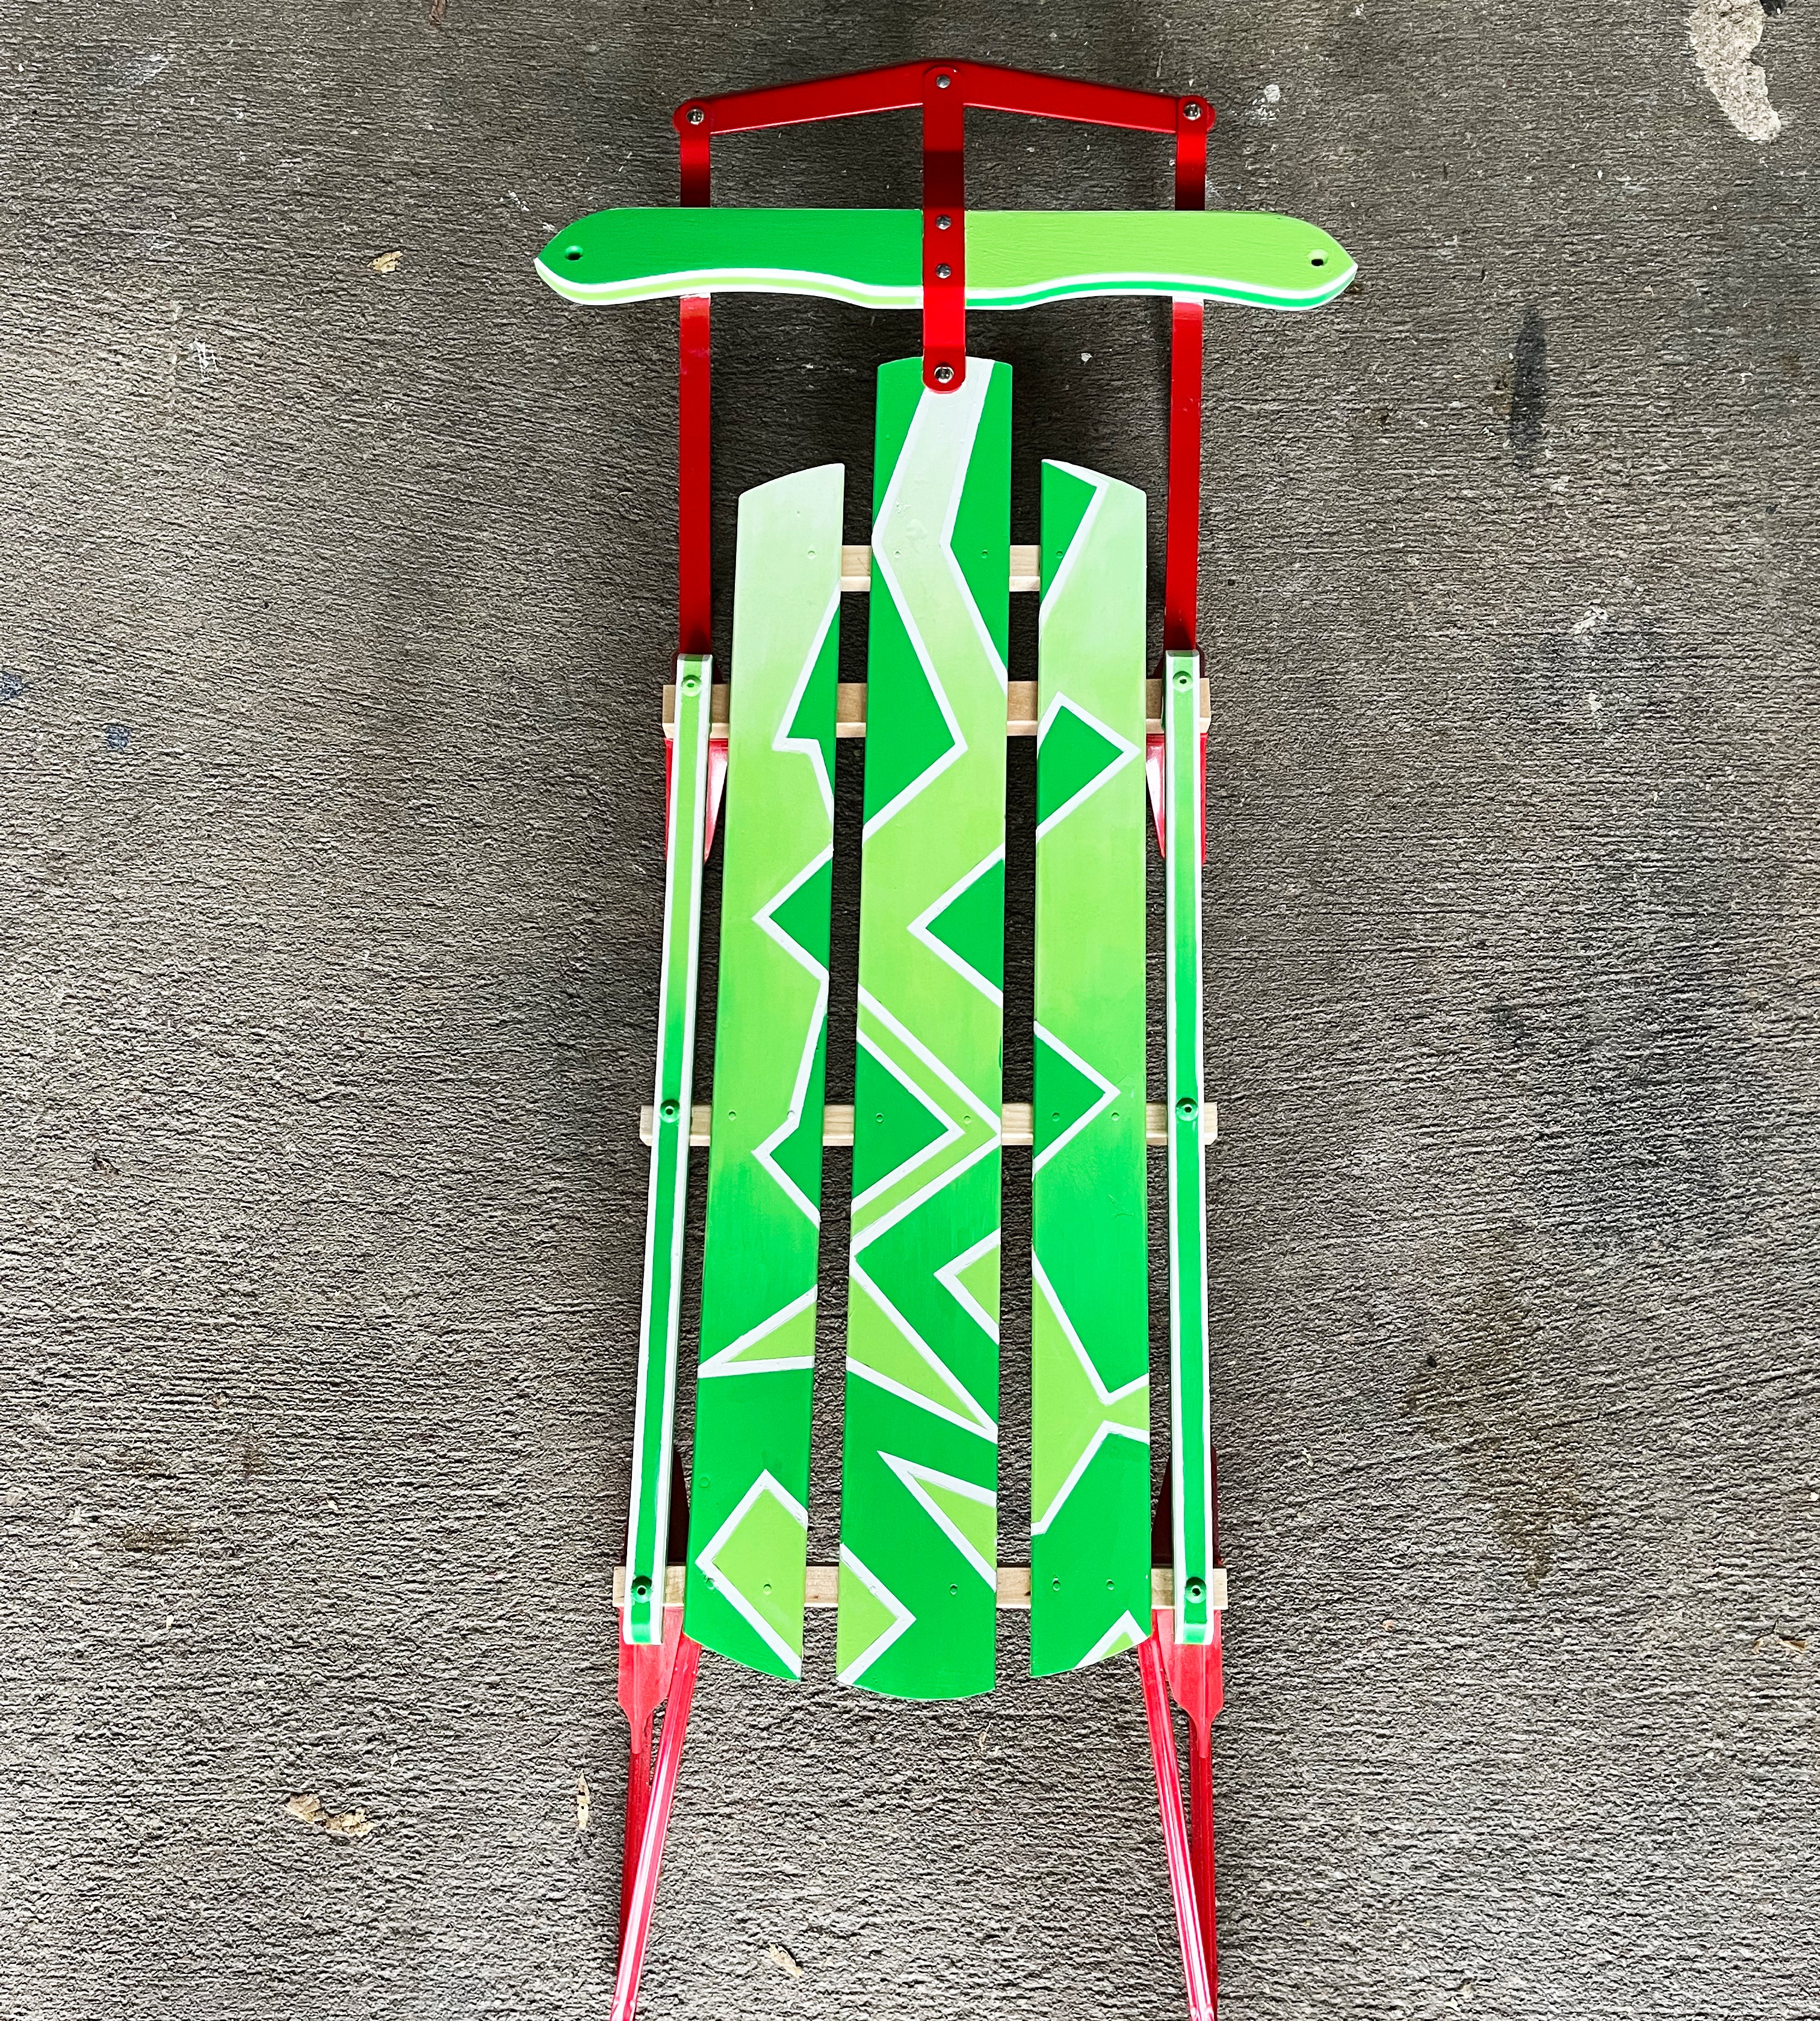 Painted Sleds